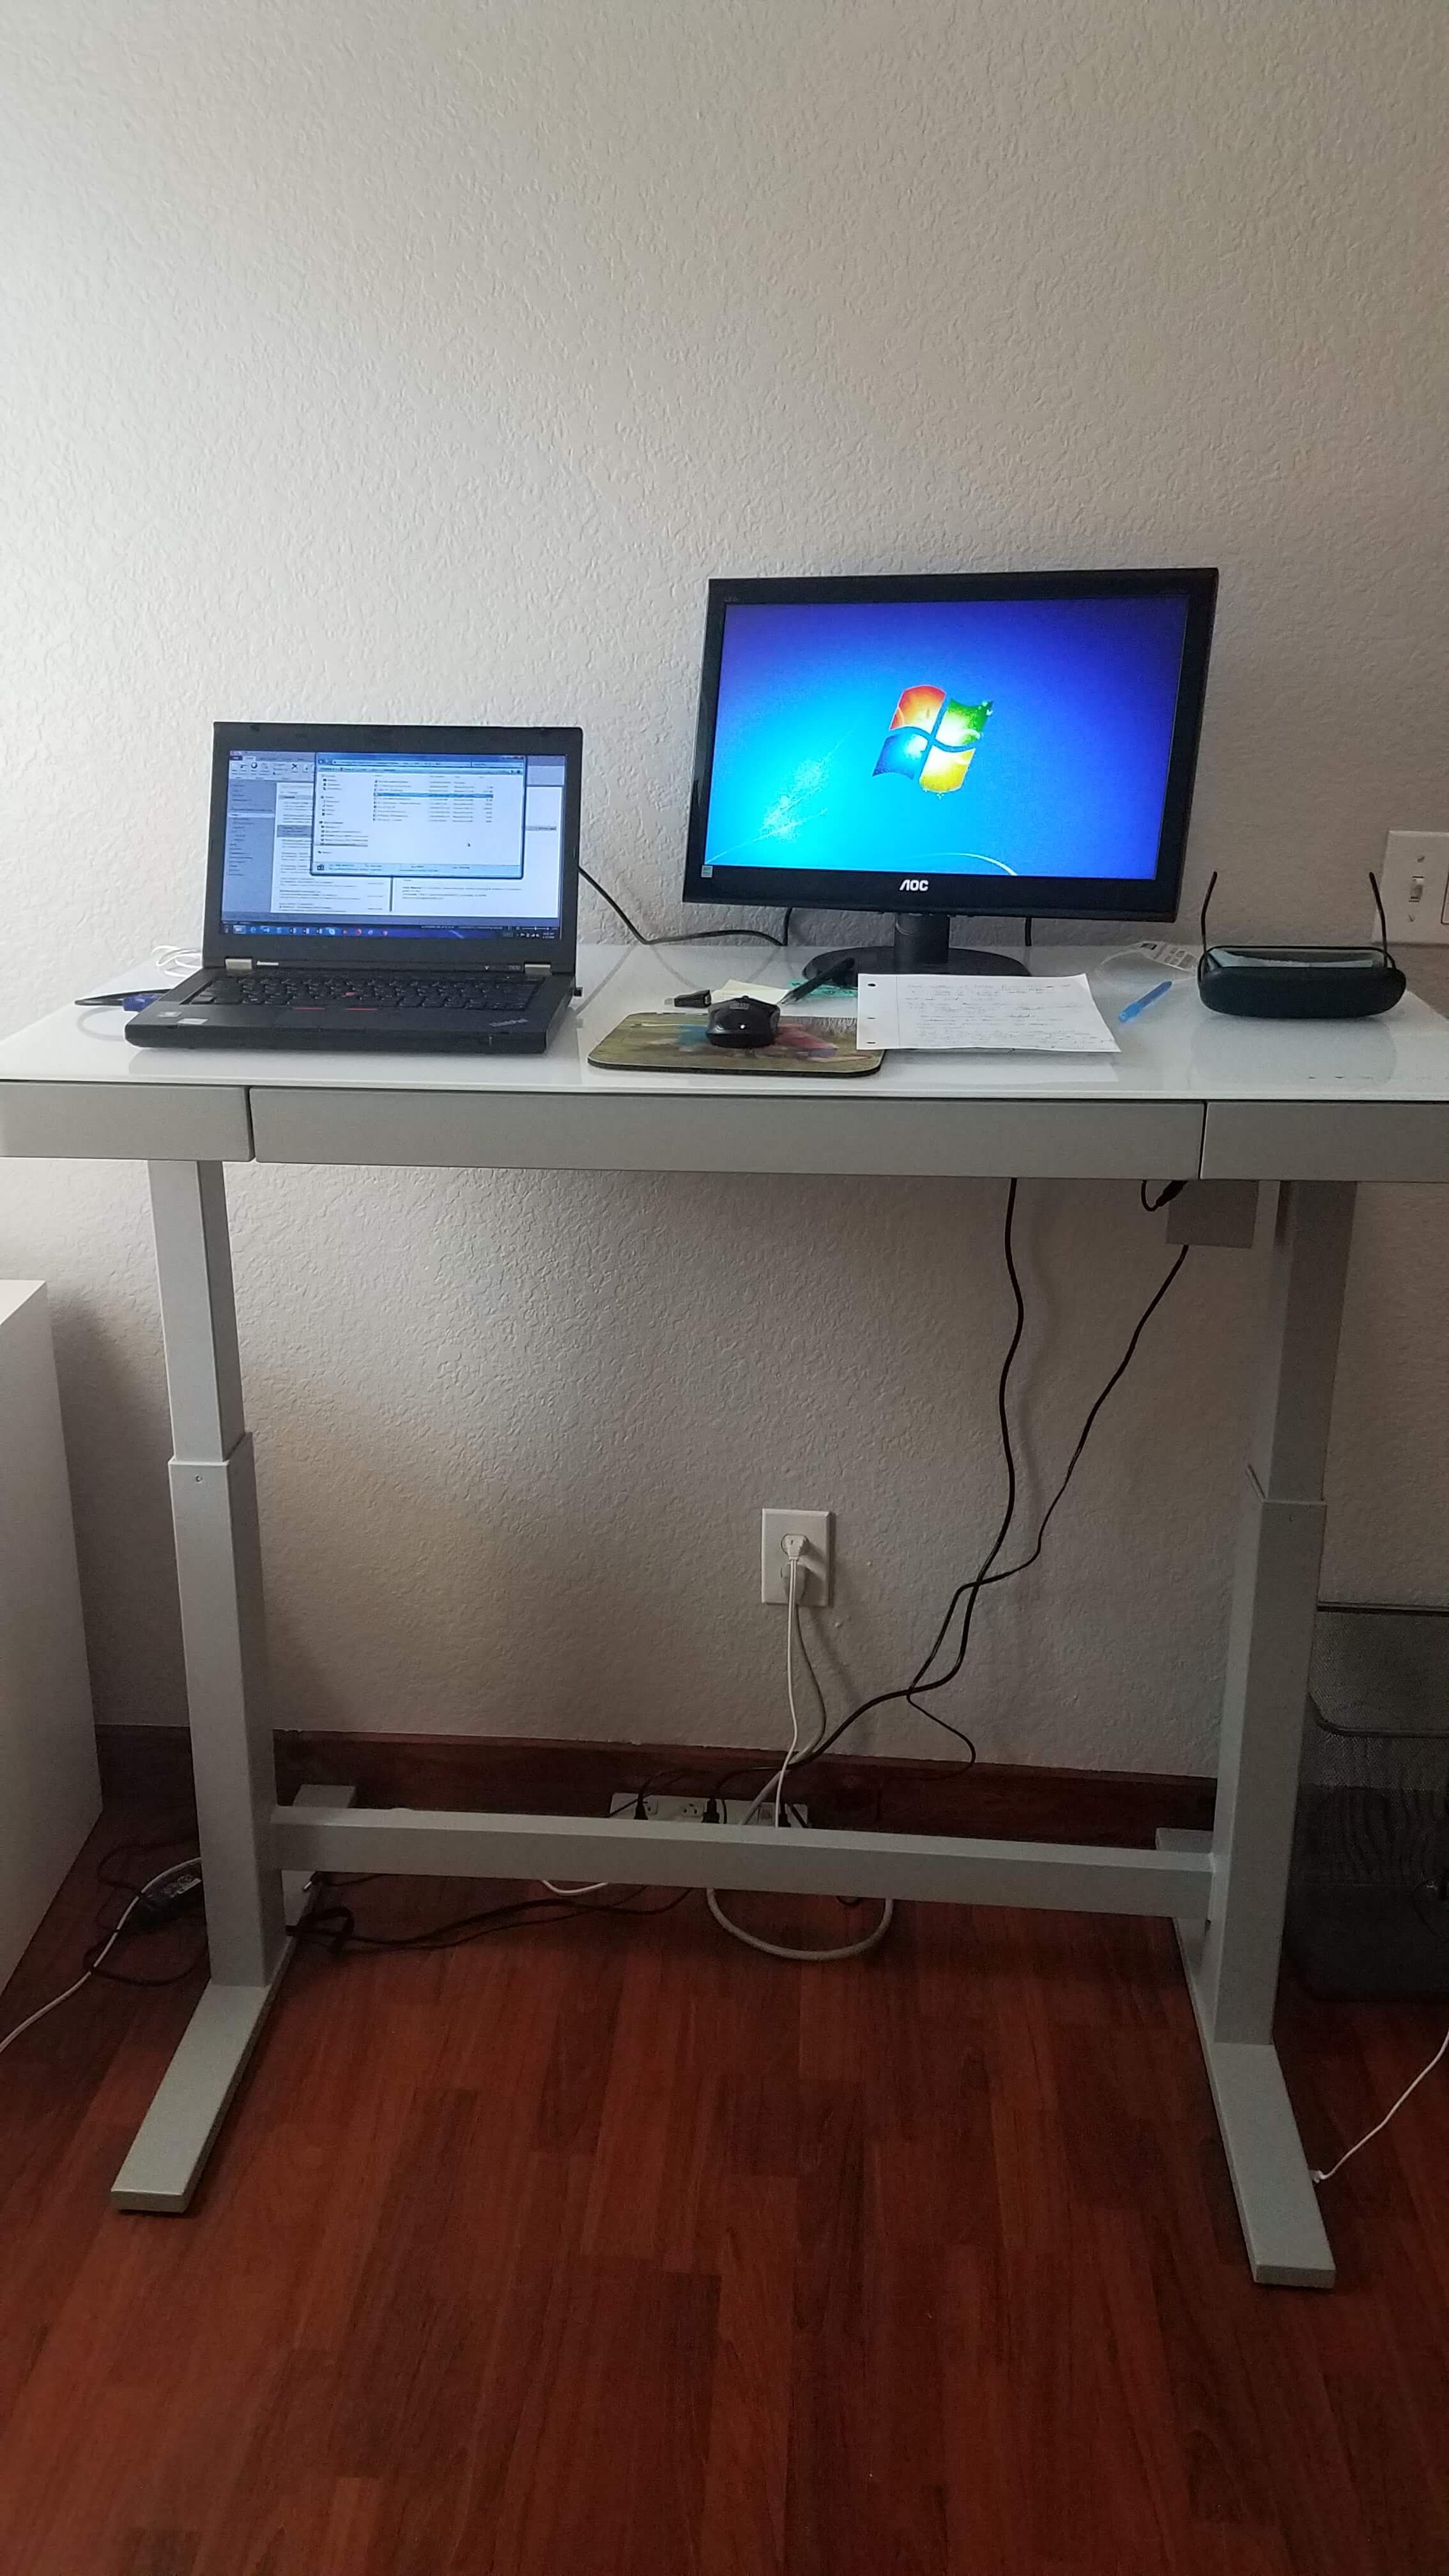 A Stand up desk helps to avoid sitting with back pain